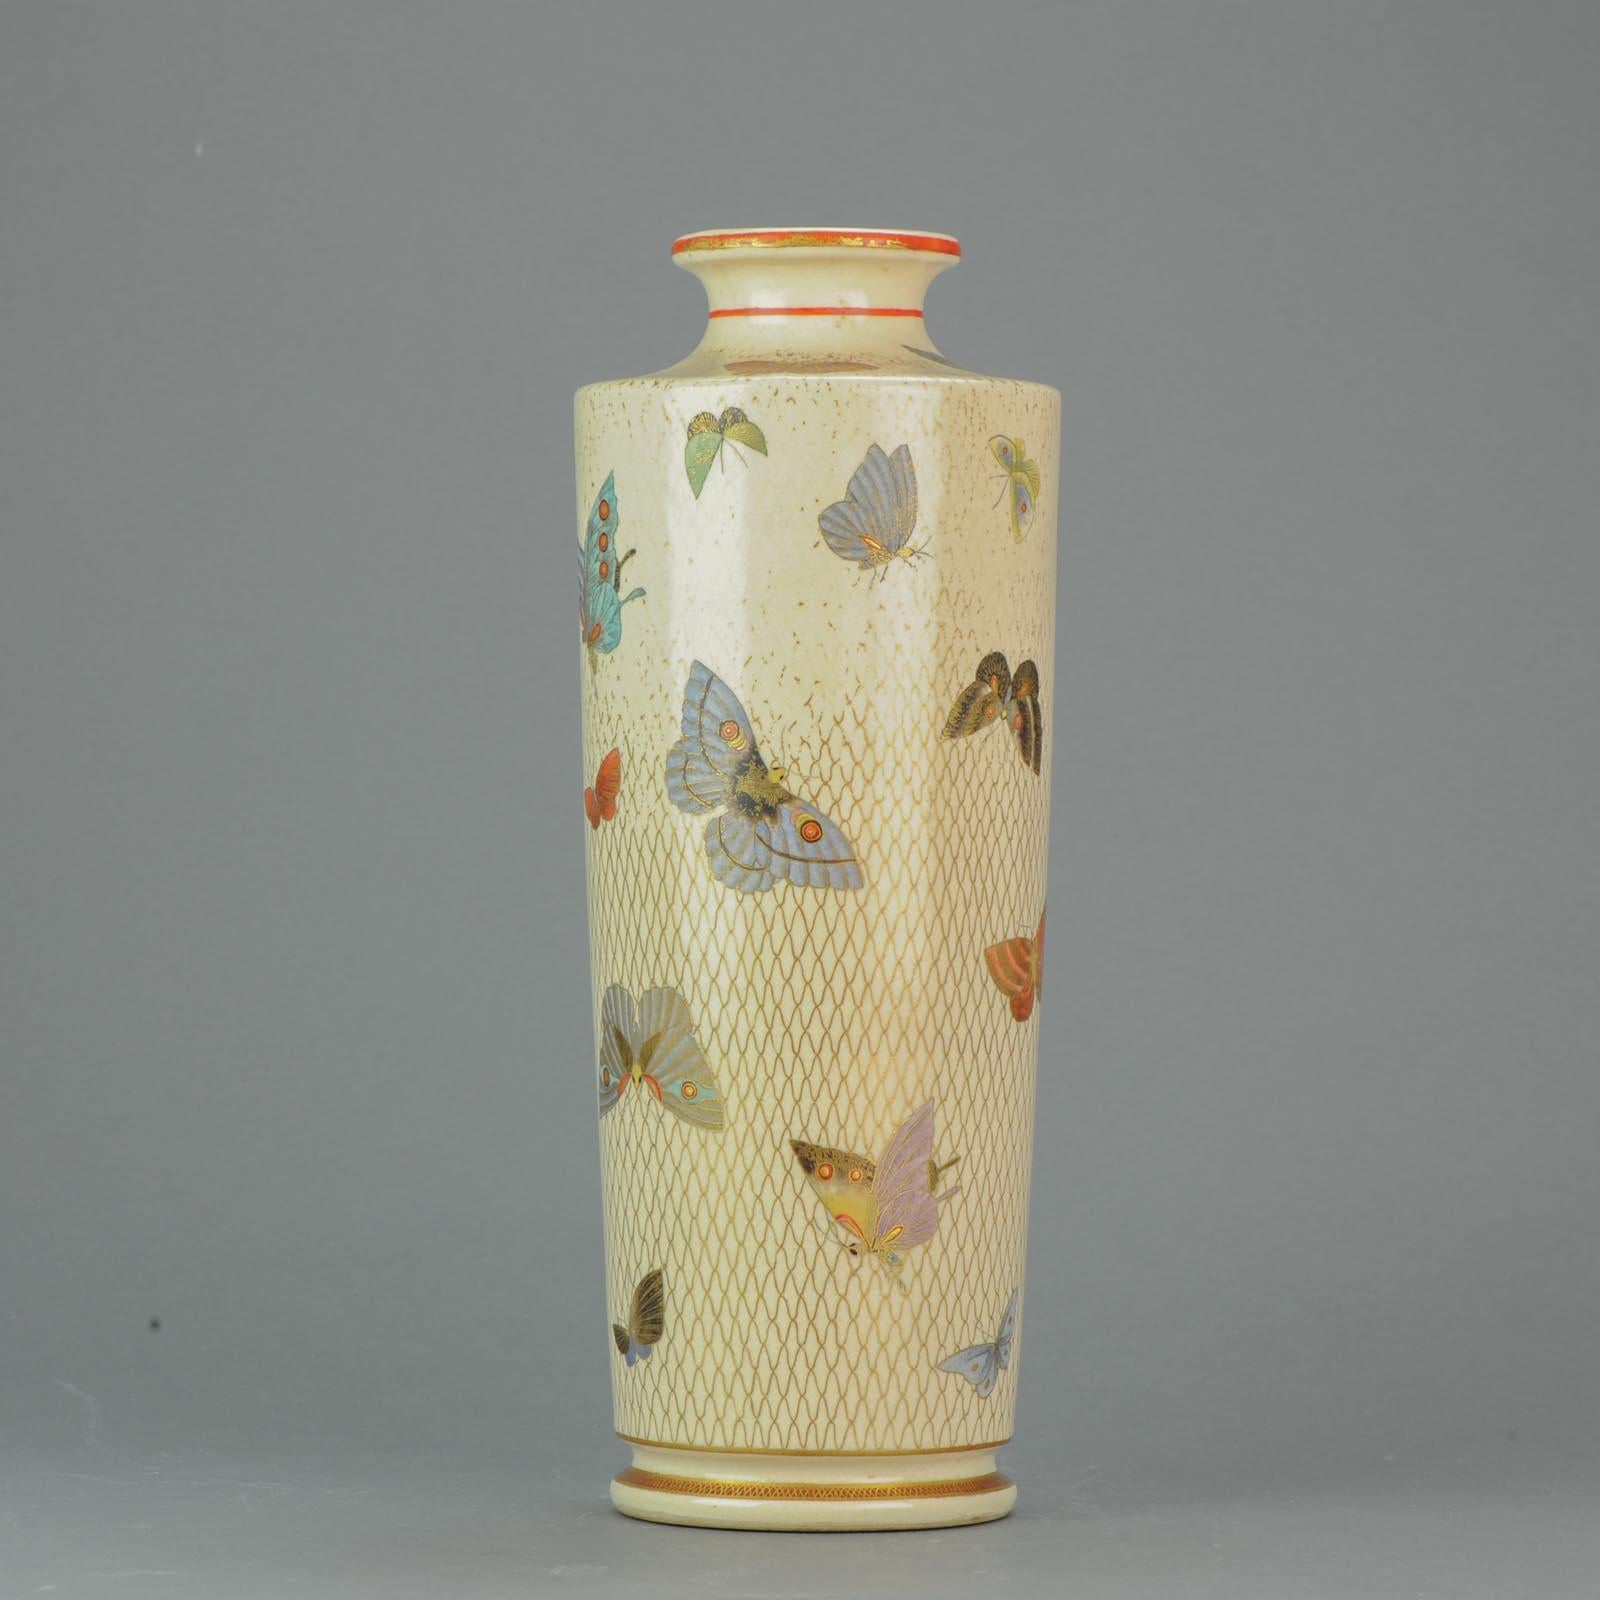 Lovely detailed piece. Marked on base with makers mark.
Condition:
Overall condition perfect, but loss to the gold enamel. Size: 315mm
Period
Meiji Periode (1867-1912).